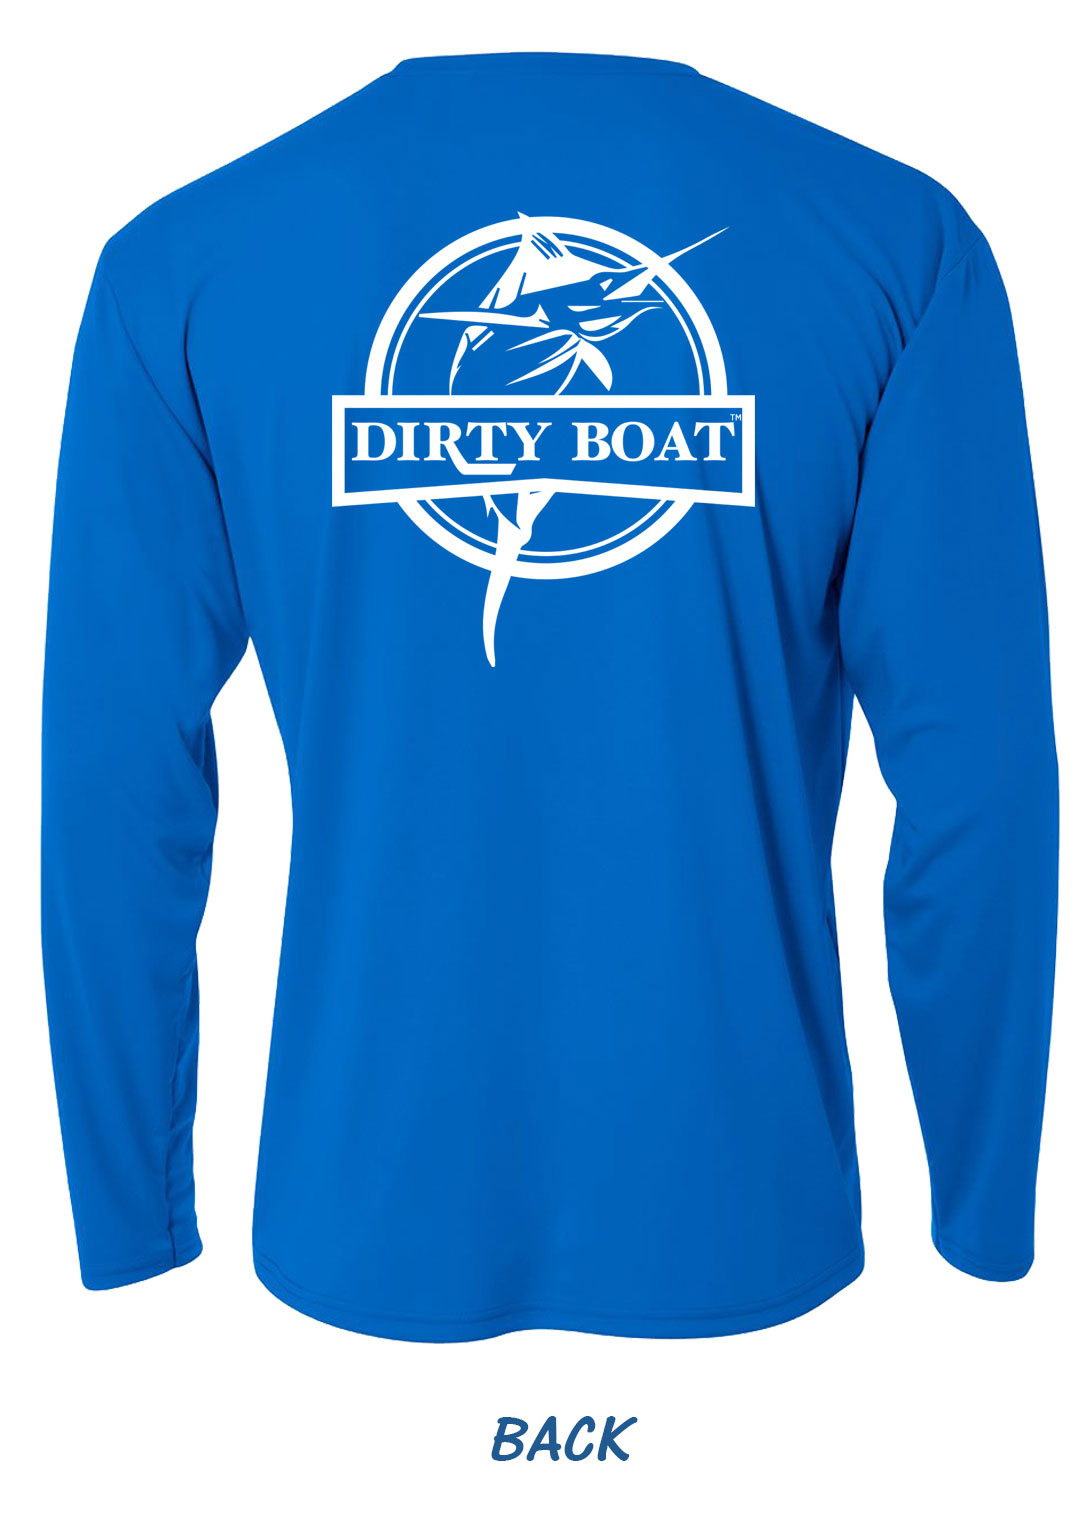 Shirts Archives - DirtyBoat